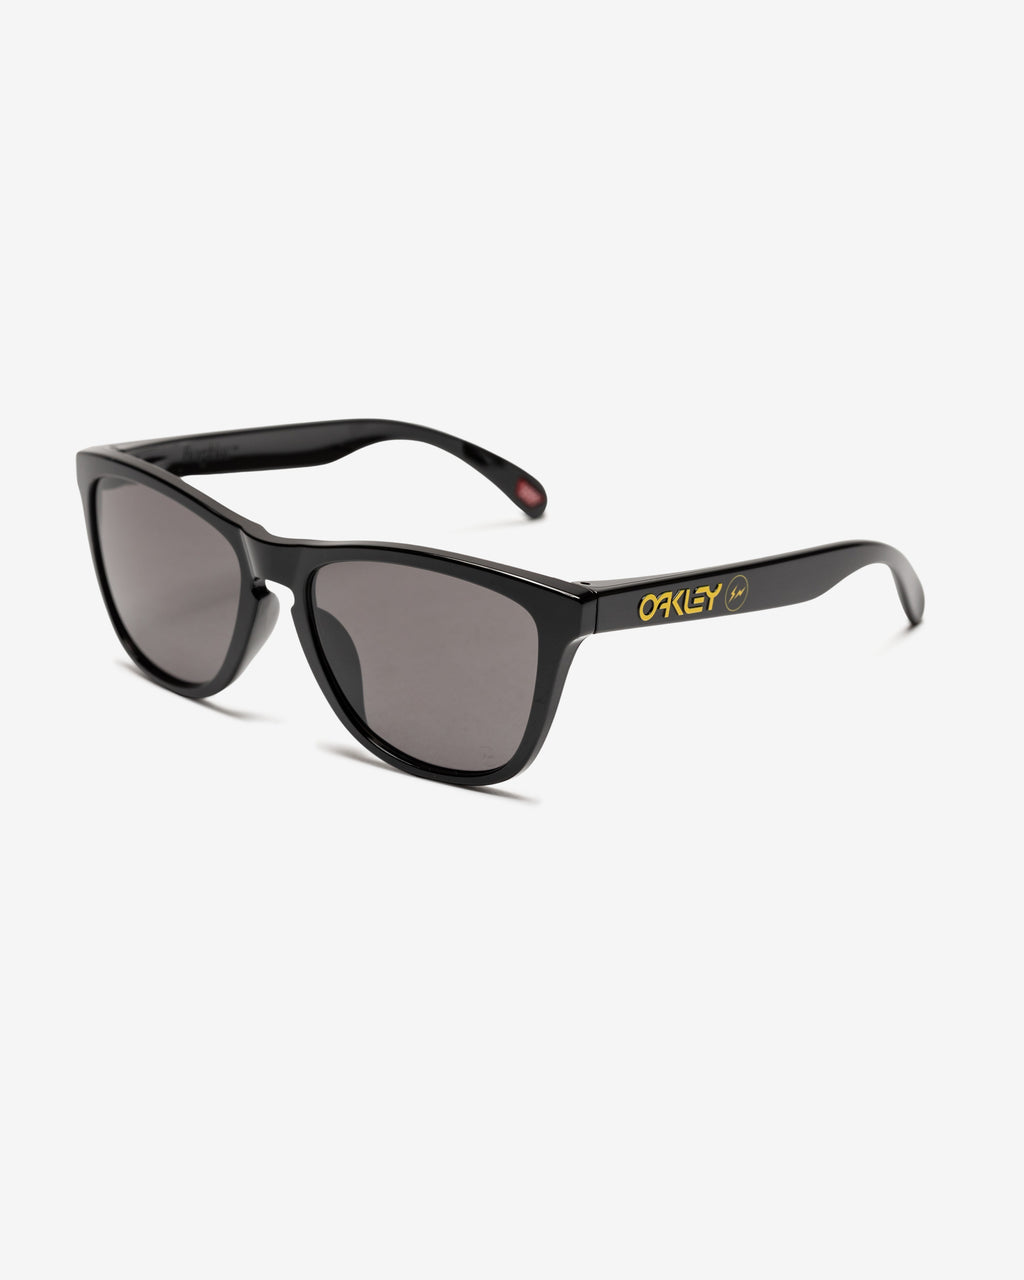 OAKLEY – Undefeated